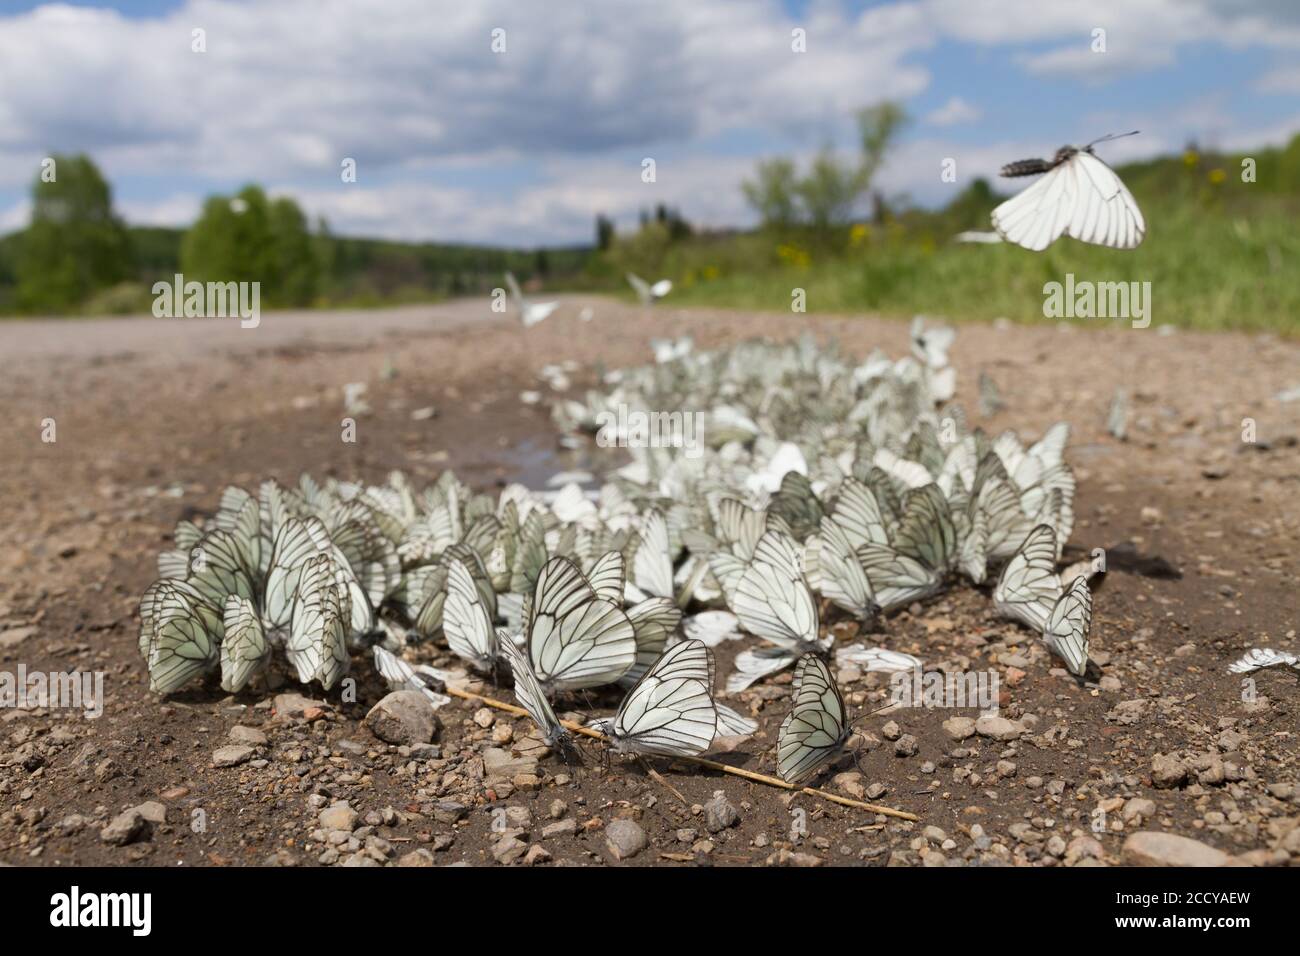 Large numbers of Black-veined White (Aporia crataegi) on a local dirt road in Kazakhstan, Stock Photo